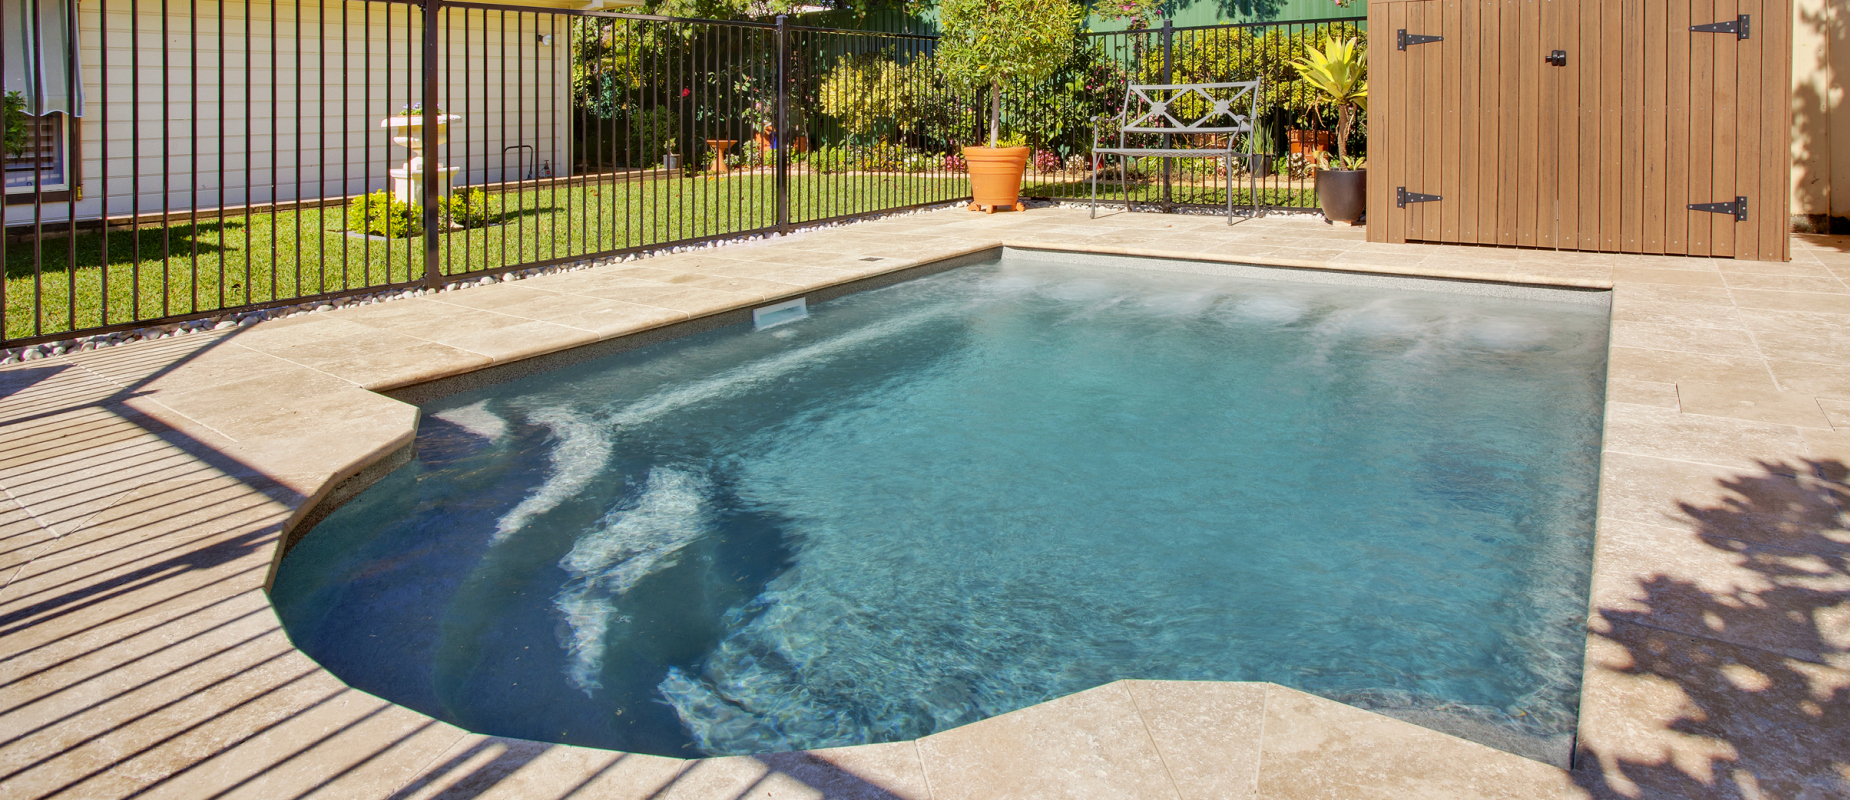 Compass-Pools-Australia_Plunge-Courtyard_Beautiful-pools-for-smaller-backyard